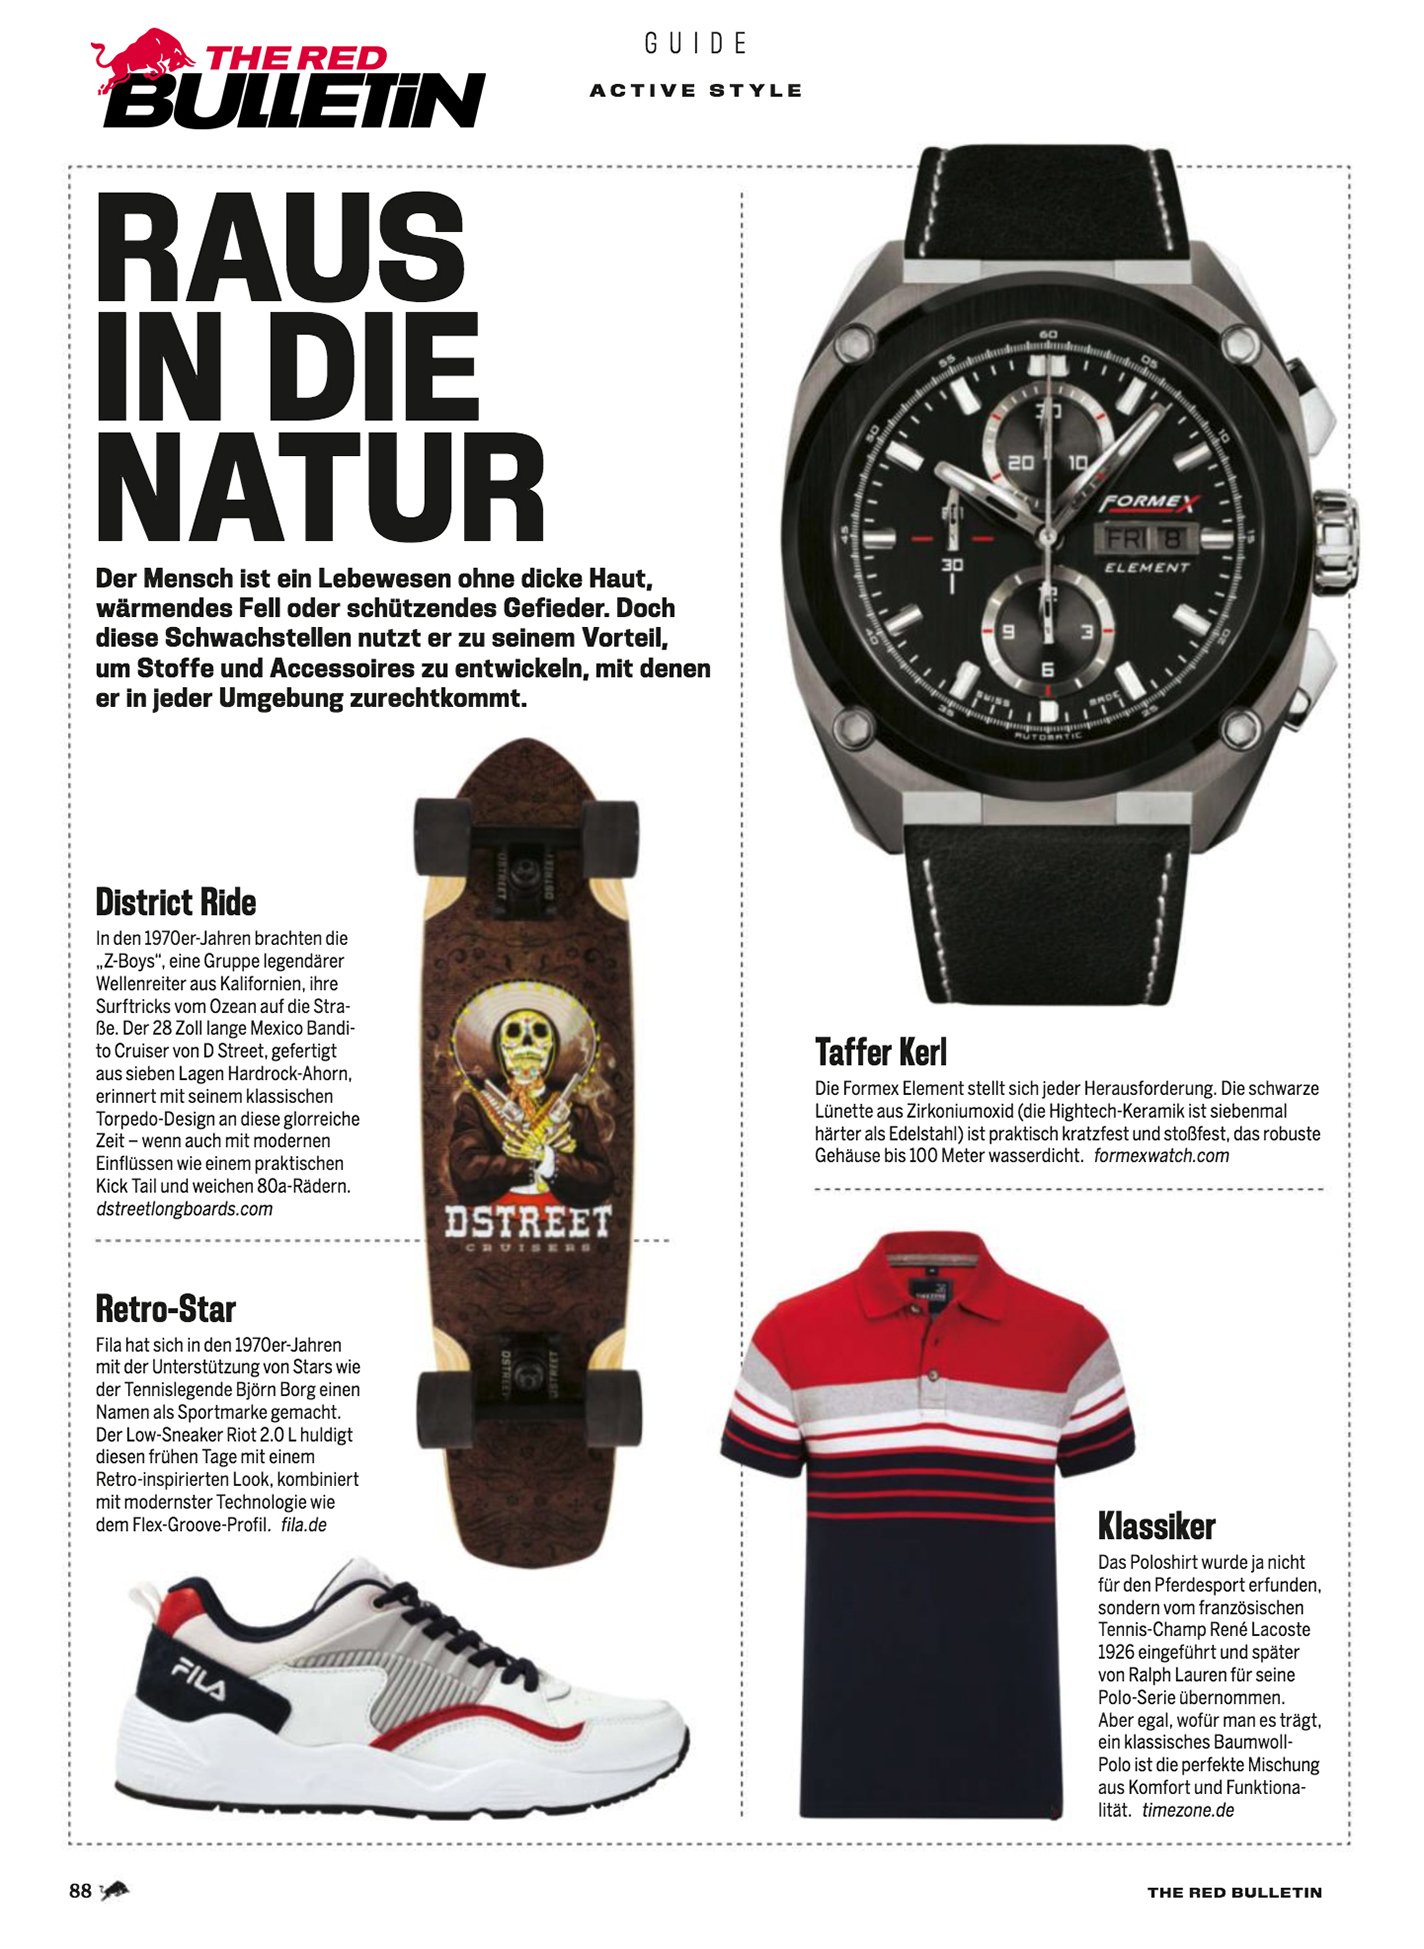 Red Bulletin: Active Style features Formex Swiss Watches